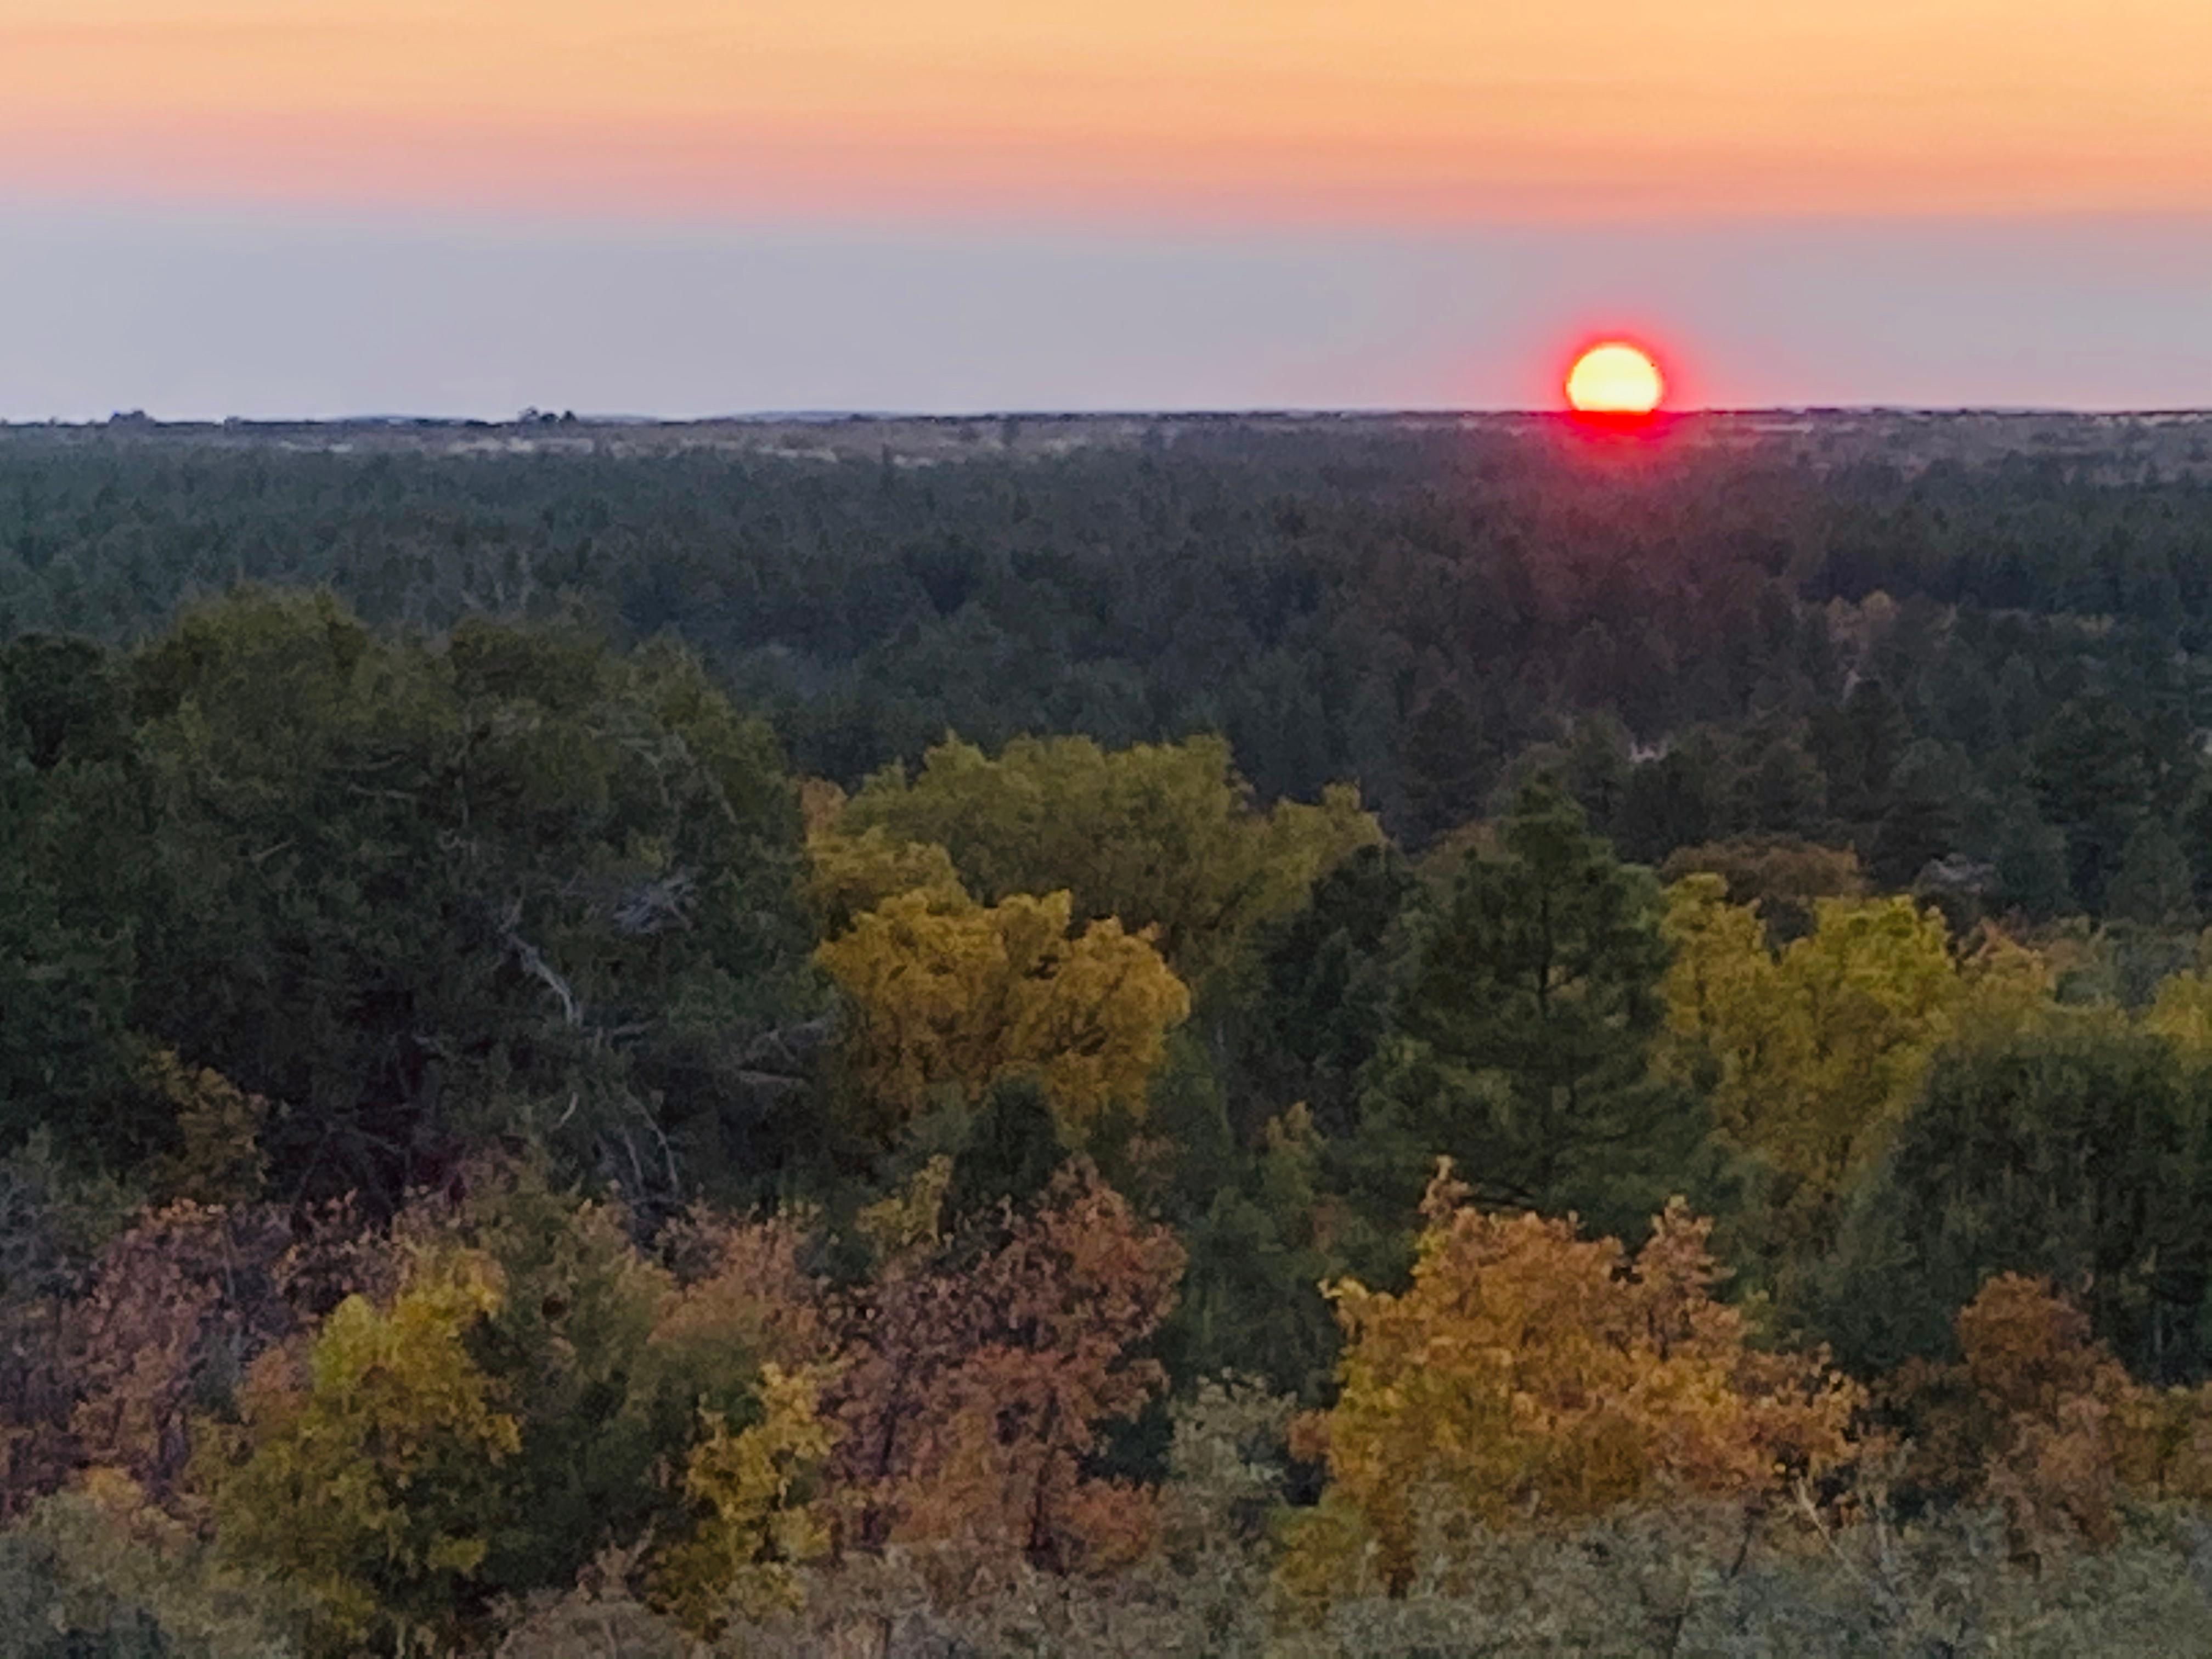 The setting sun sits above trees and shrubs adorned with hues of orange, red and green.